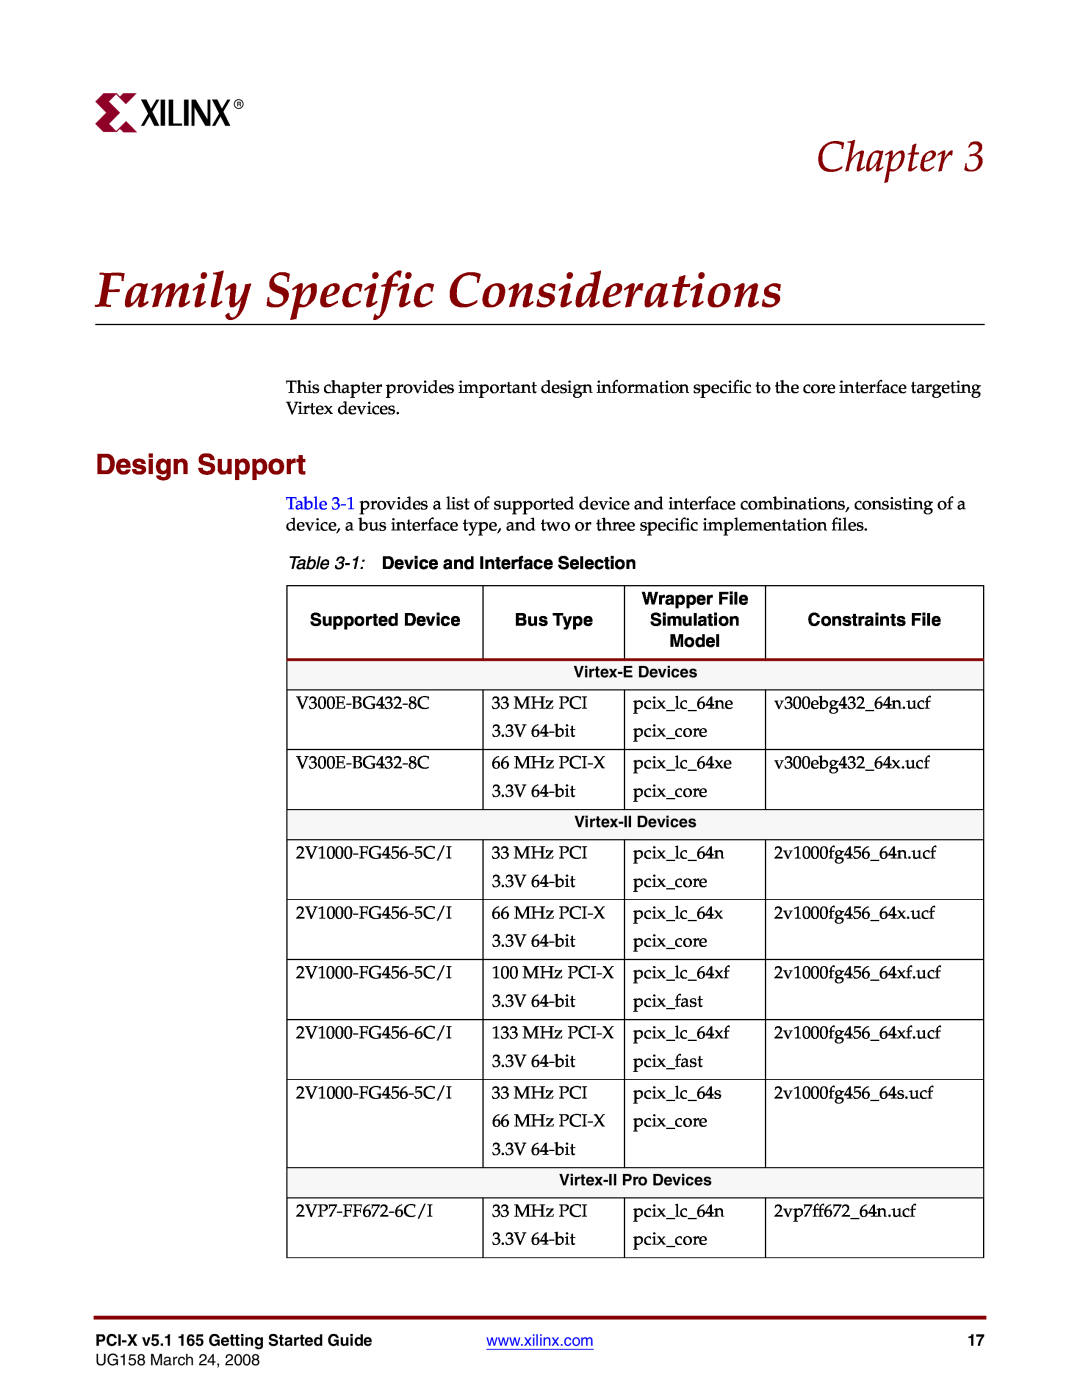 Xilinx PCI-X v5.1 manual Family Specific Considerations, Design Support, 1 Device and Interface Selection, Supported Device 